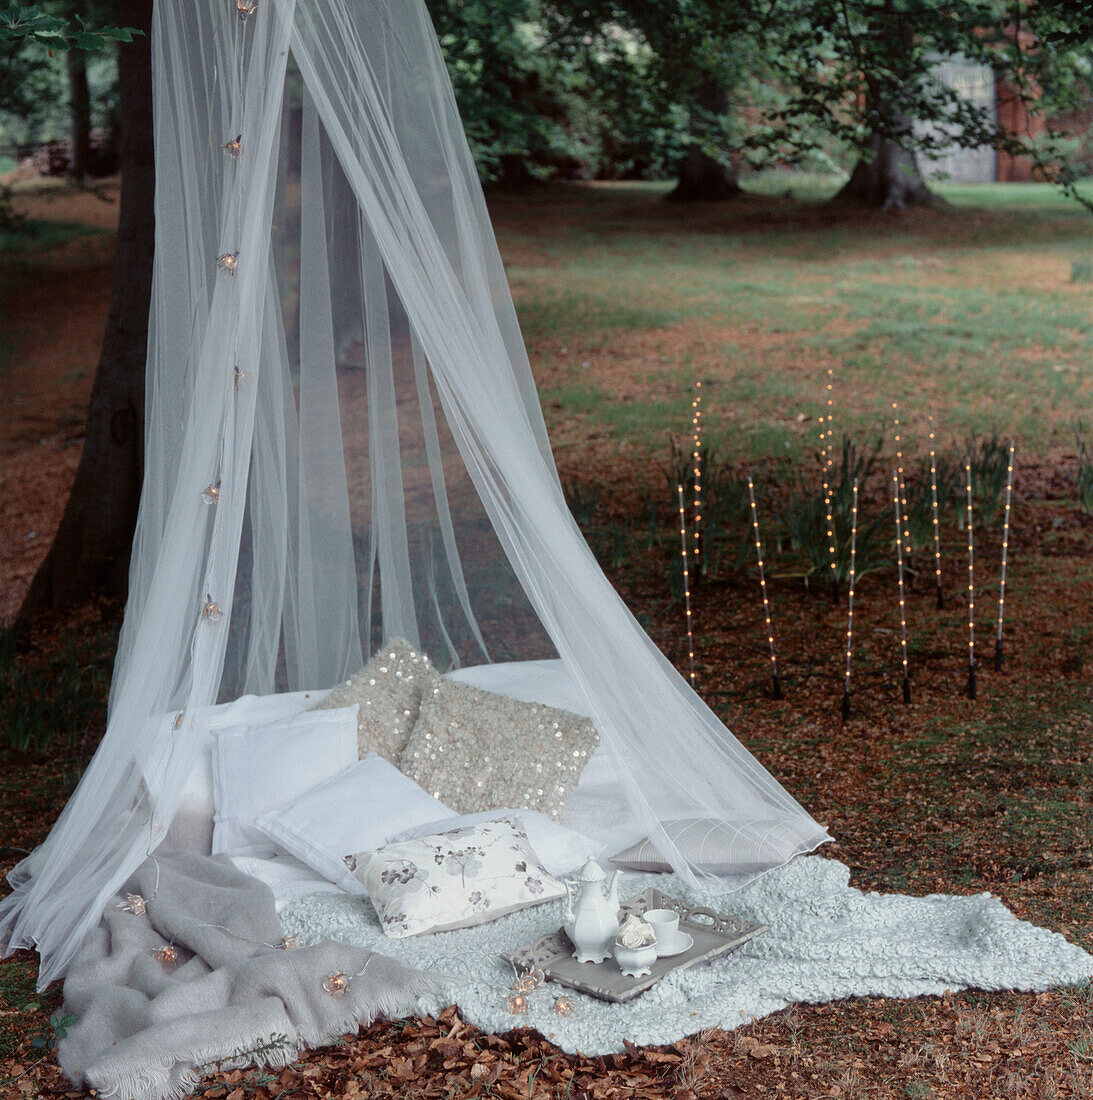 Romantic picnic setting in the woods with cushions blankets and fairy lights